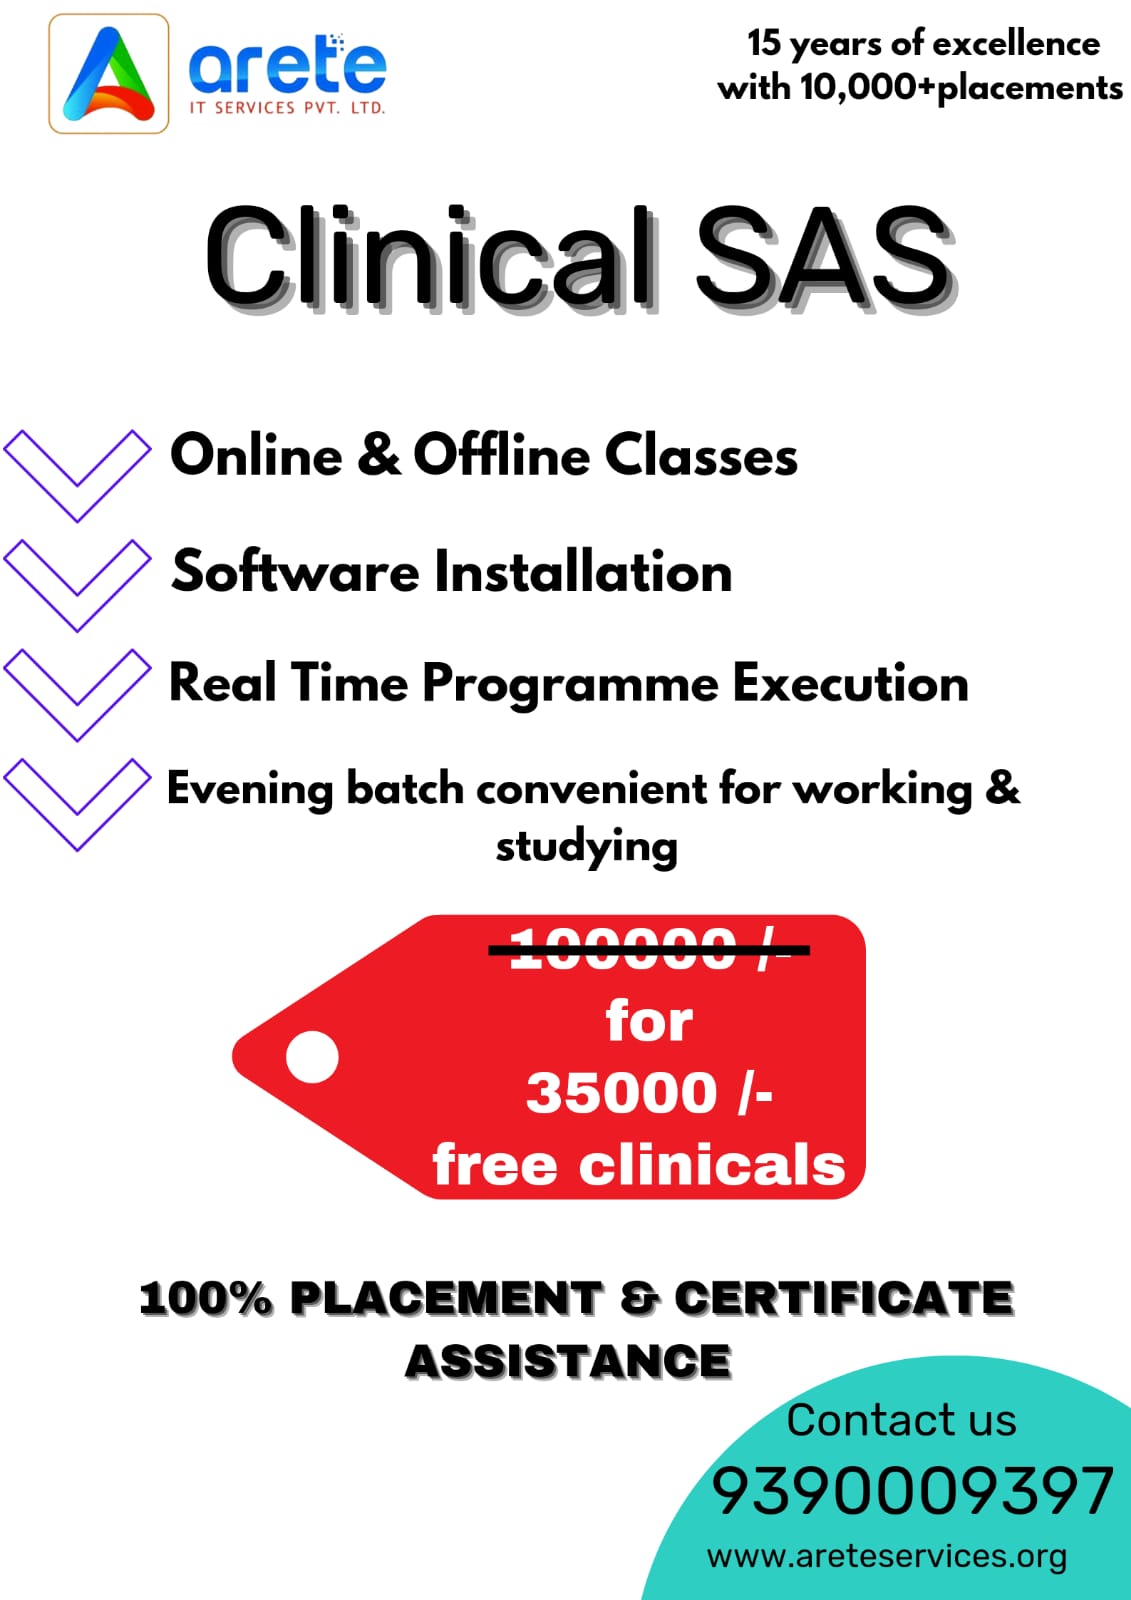 Clinical SAS training and placements with Certificate  - Andhra Pradesh - Guntur ID1518236